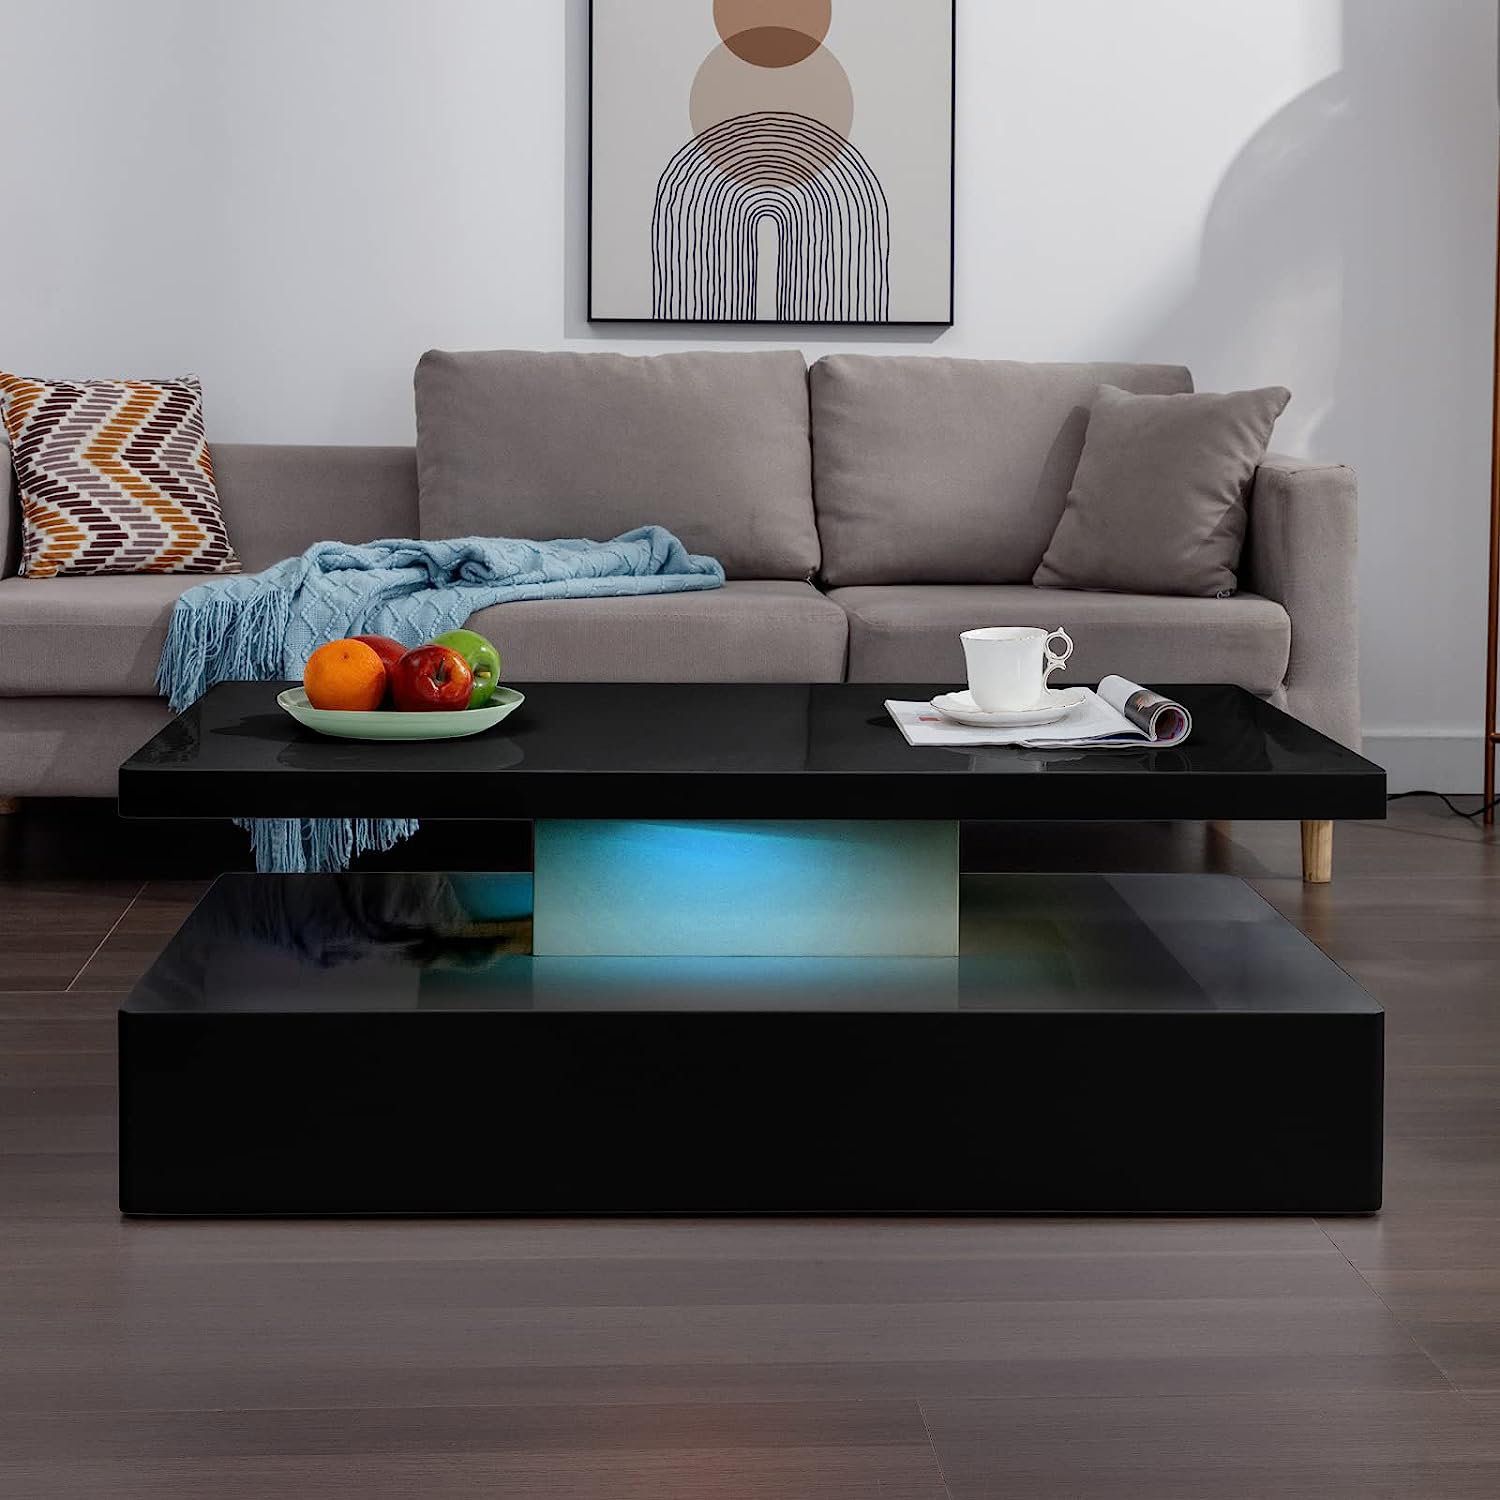 Ivy Bronx Tabu Modern Led Coffee Table With 12 Colors Lights, Living Room Table  Furniture/End Table & Reviews | Wayfair Throughout Rectangular Led Coffee Tables (Photo 5 of 15)